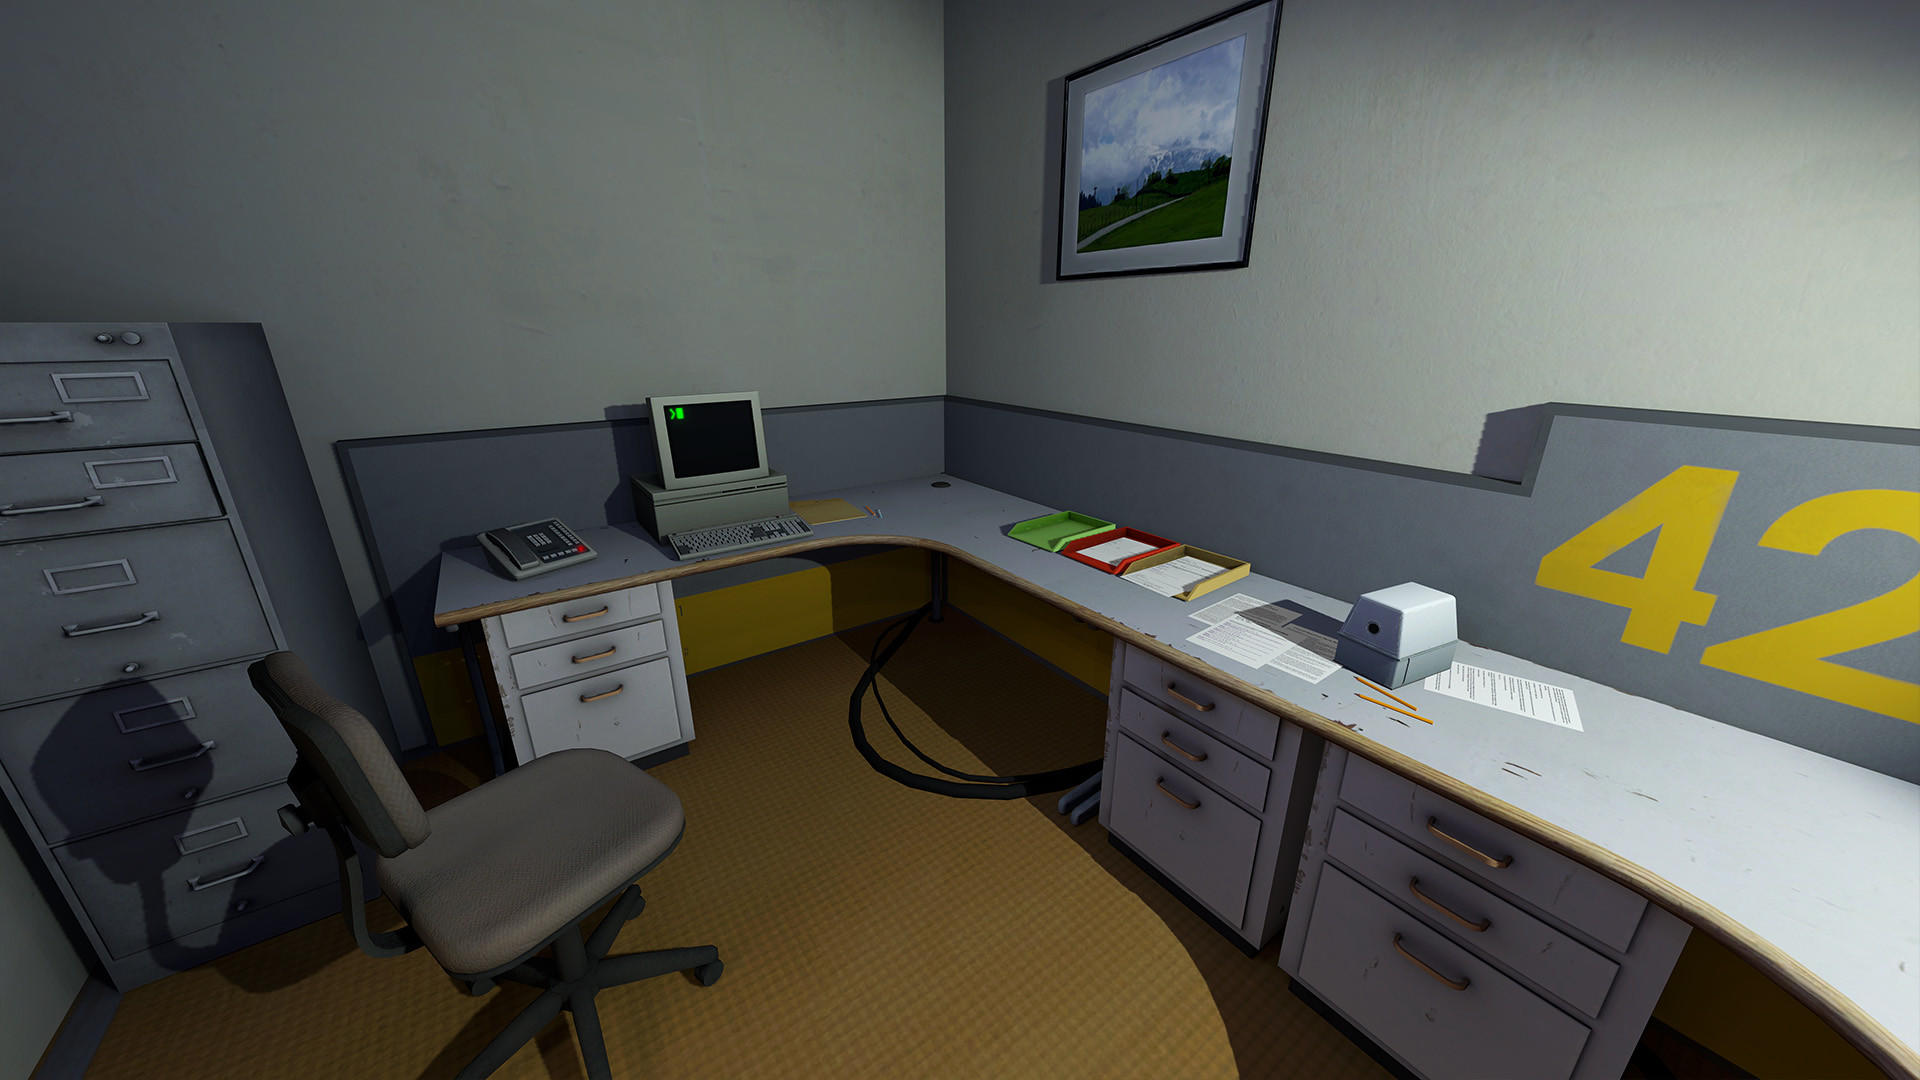 The Stanley Parable: Ultra Deluxe screenshot game